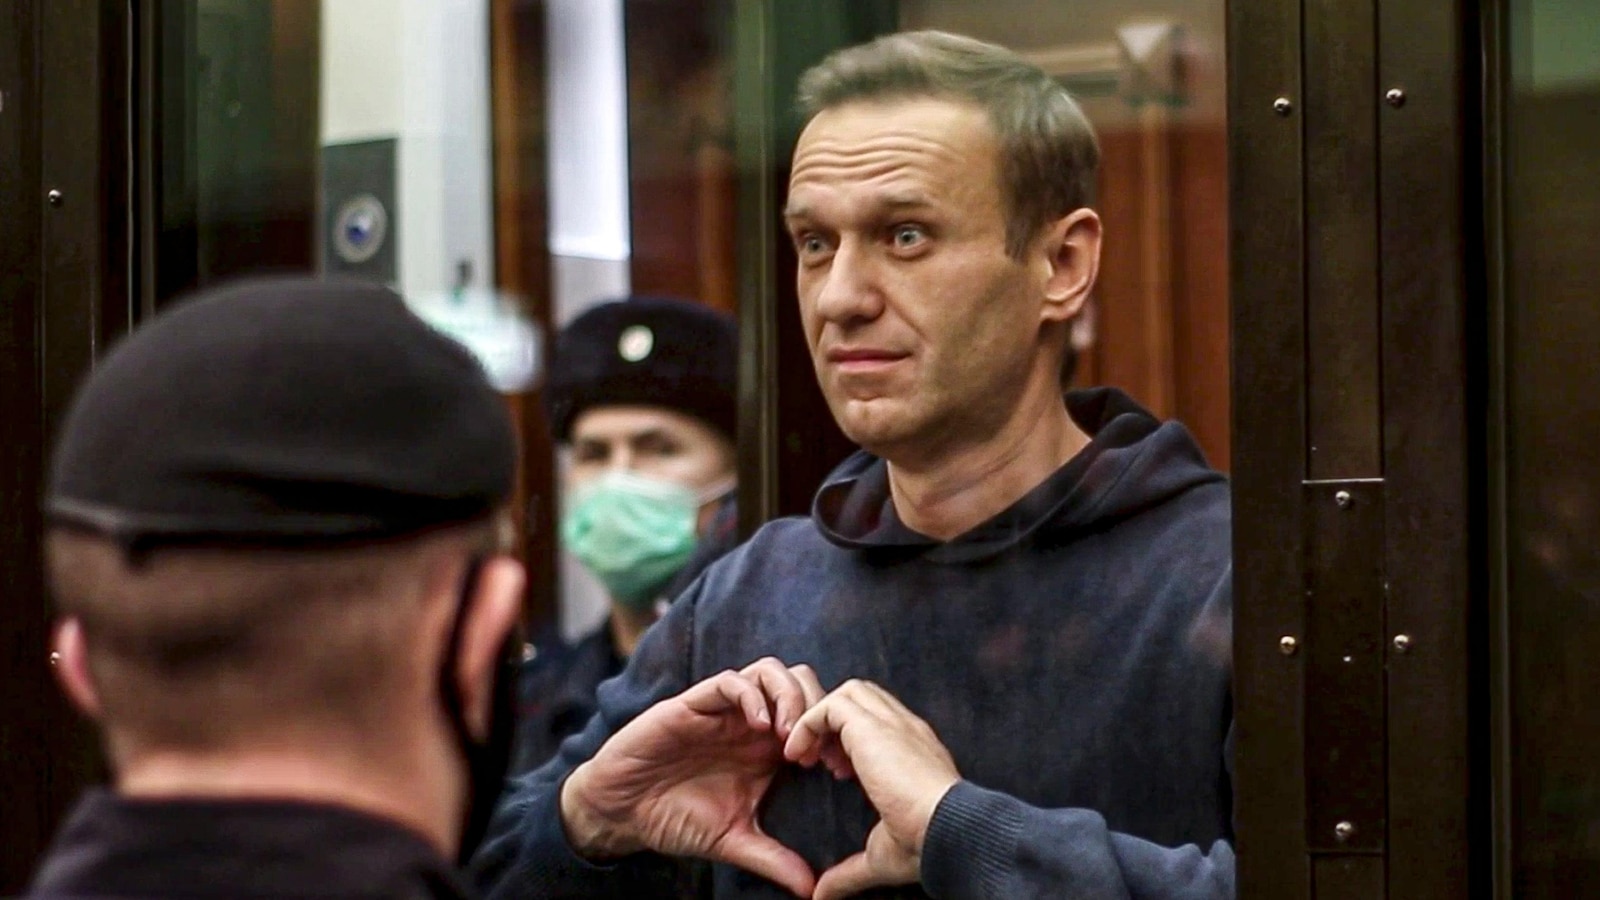 Russian opposition leader Alexei Navalny's funeral scheduled for Friday